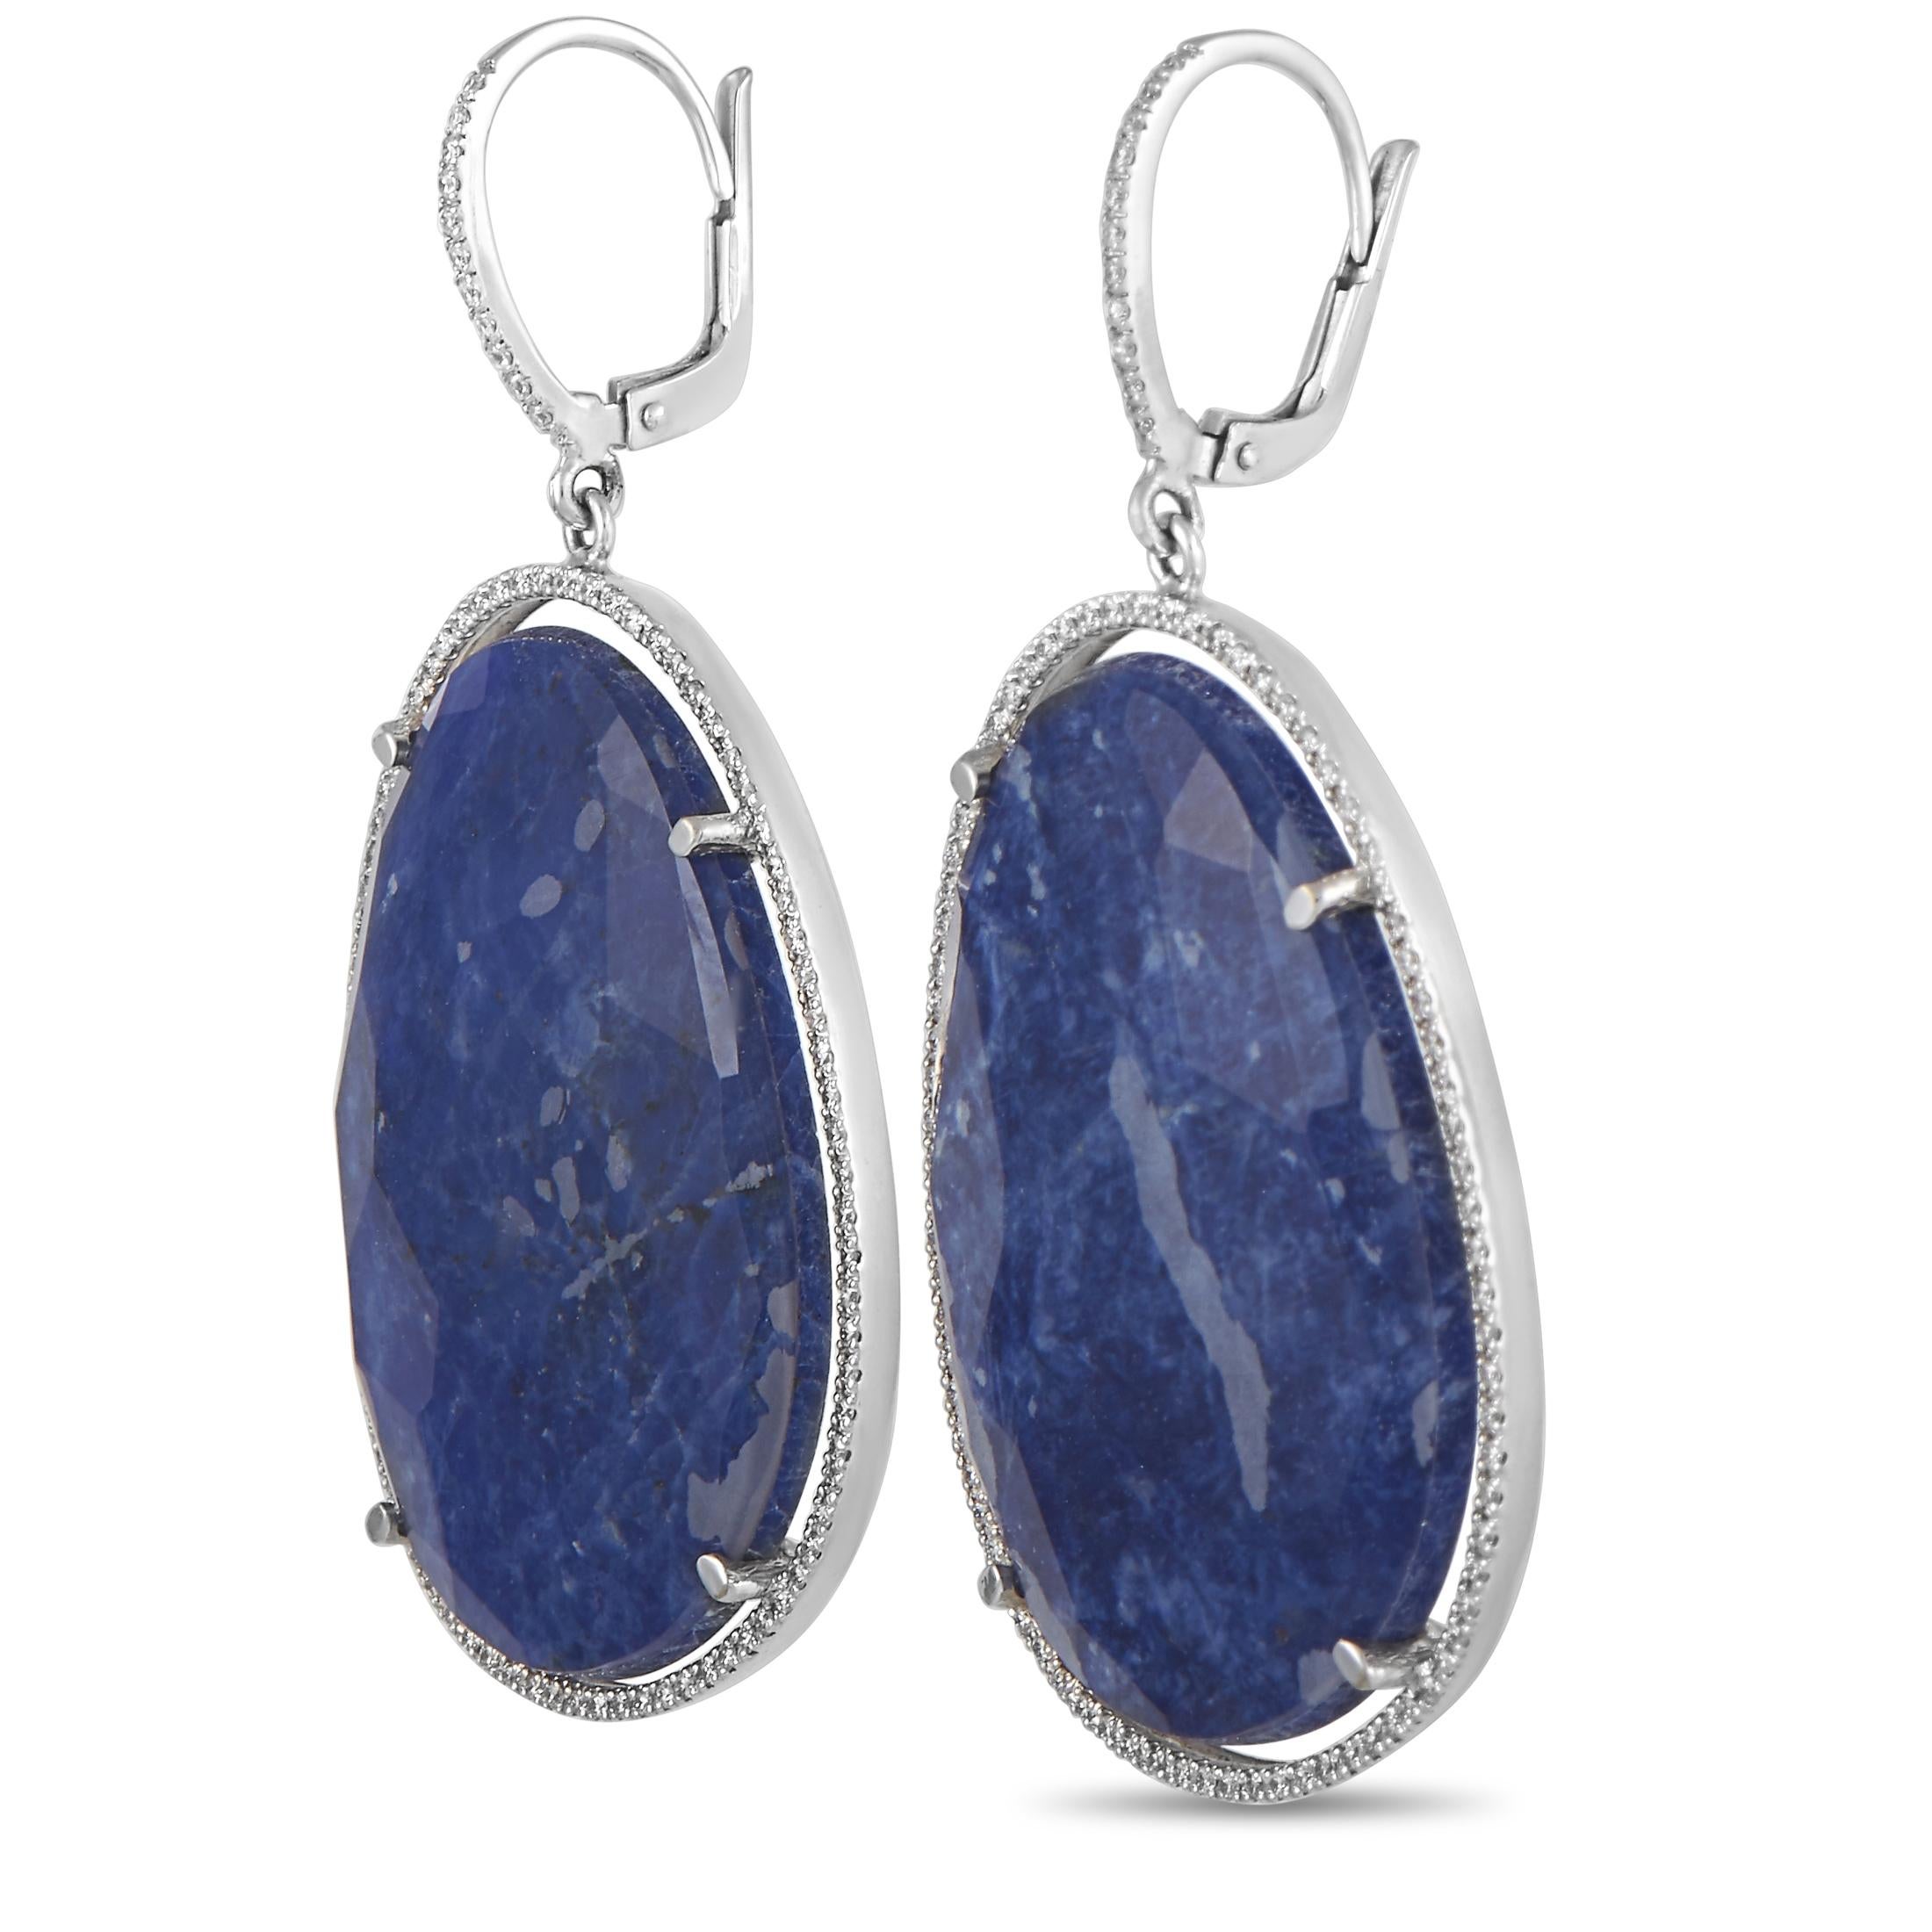 These Zoccai earrings are made of 18K white gold and embellished with lapis lazuli stones and a total of 0.95 carats of diamonds. The earrings measure 2.10” in length and 1.10” in width and each of the two weighs 8.9 grams.
 
 The pair is offered